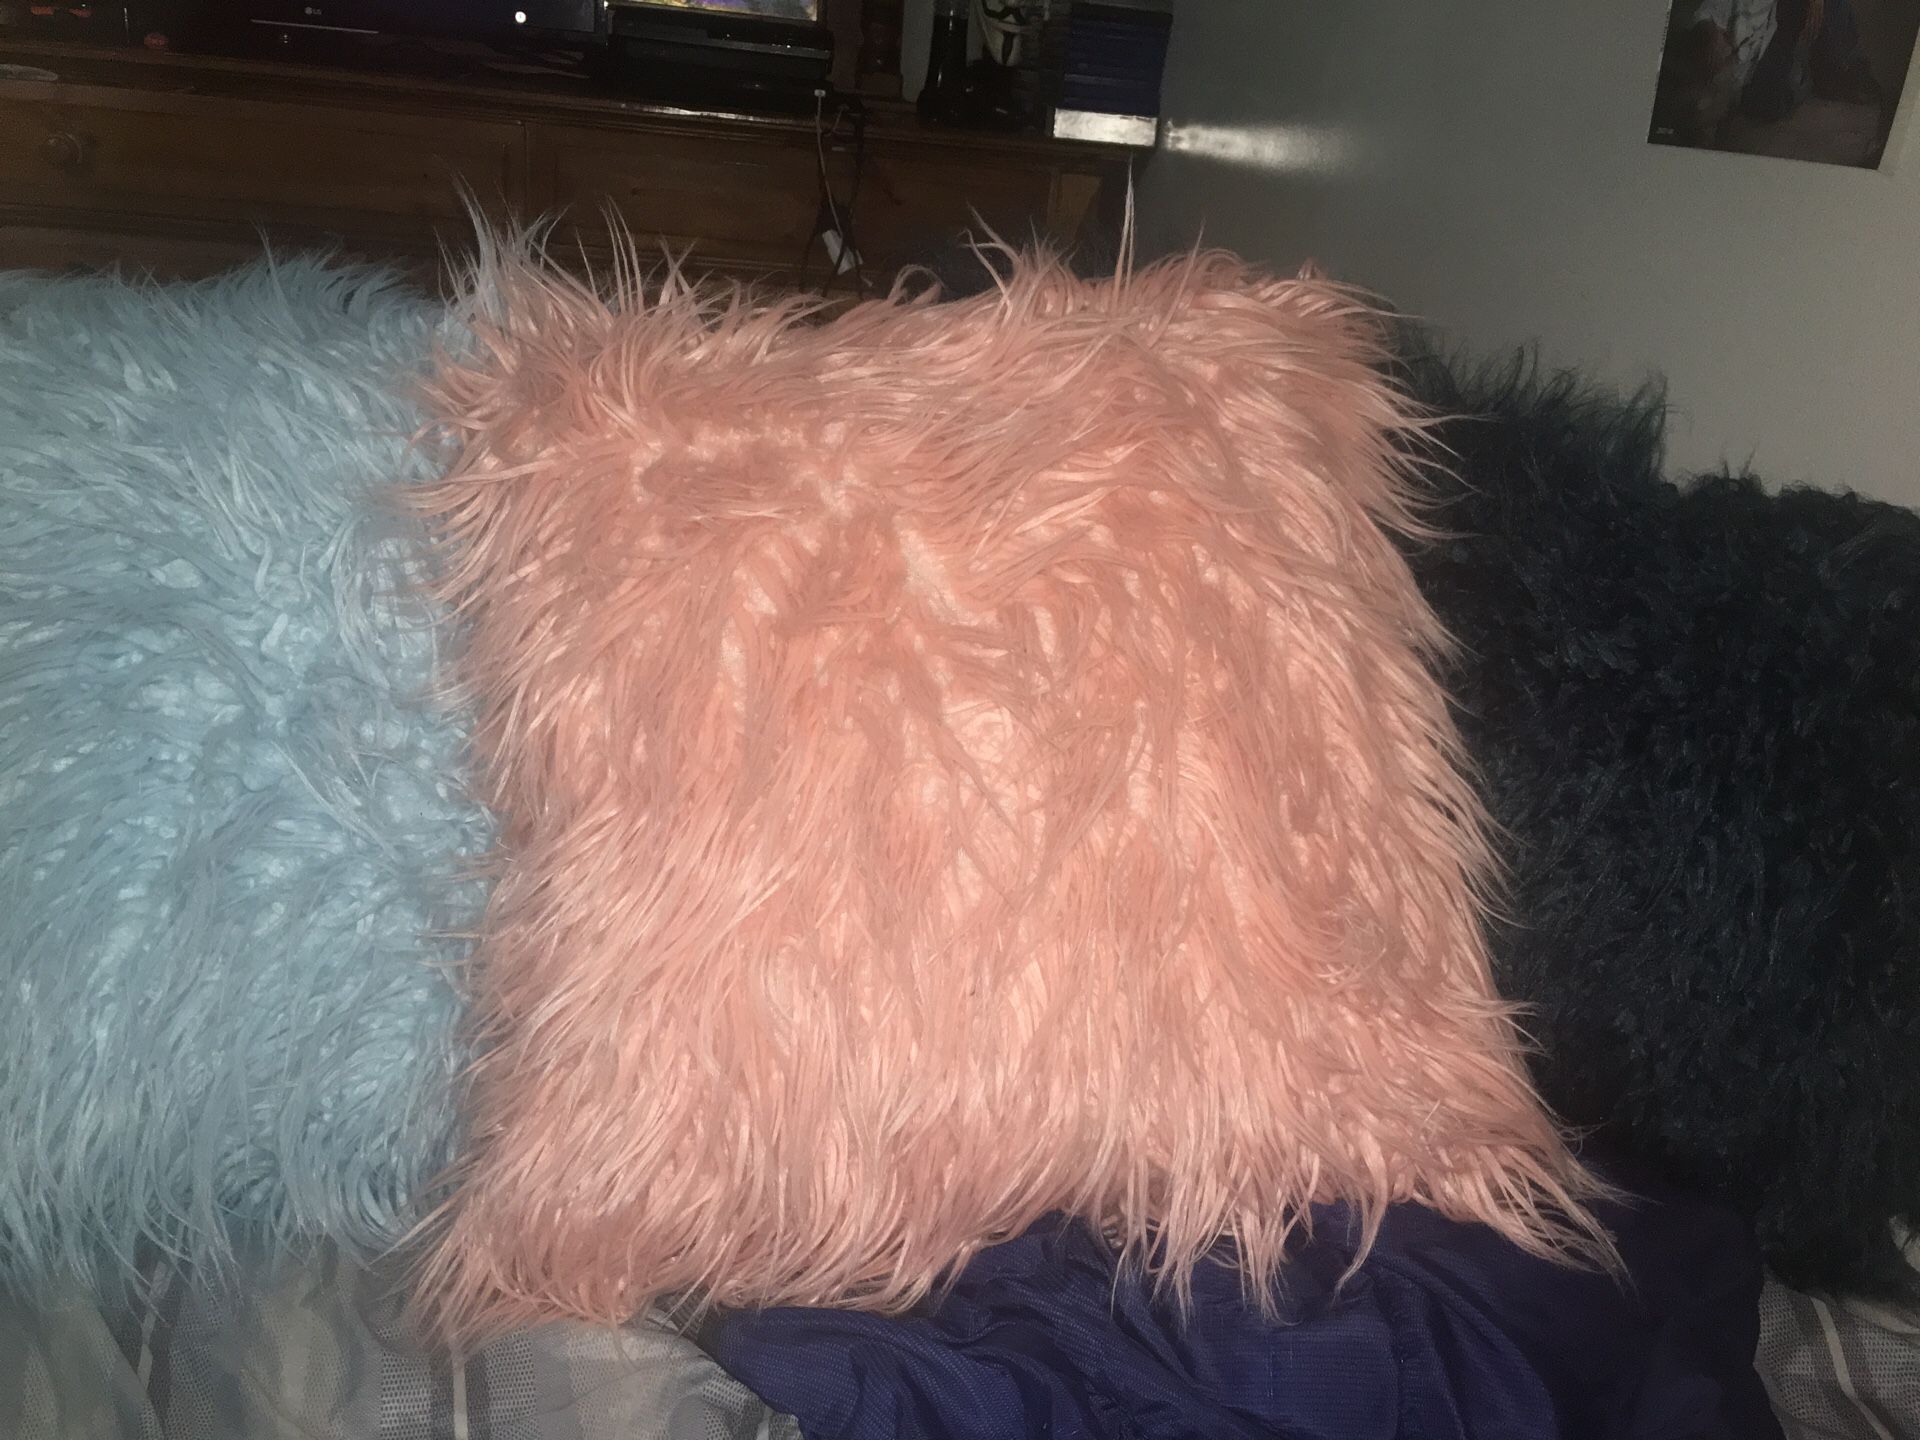 Furry Stuffed Pillows! Buy 1, 2 or all 3